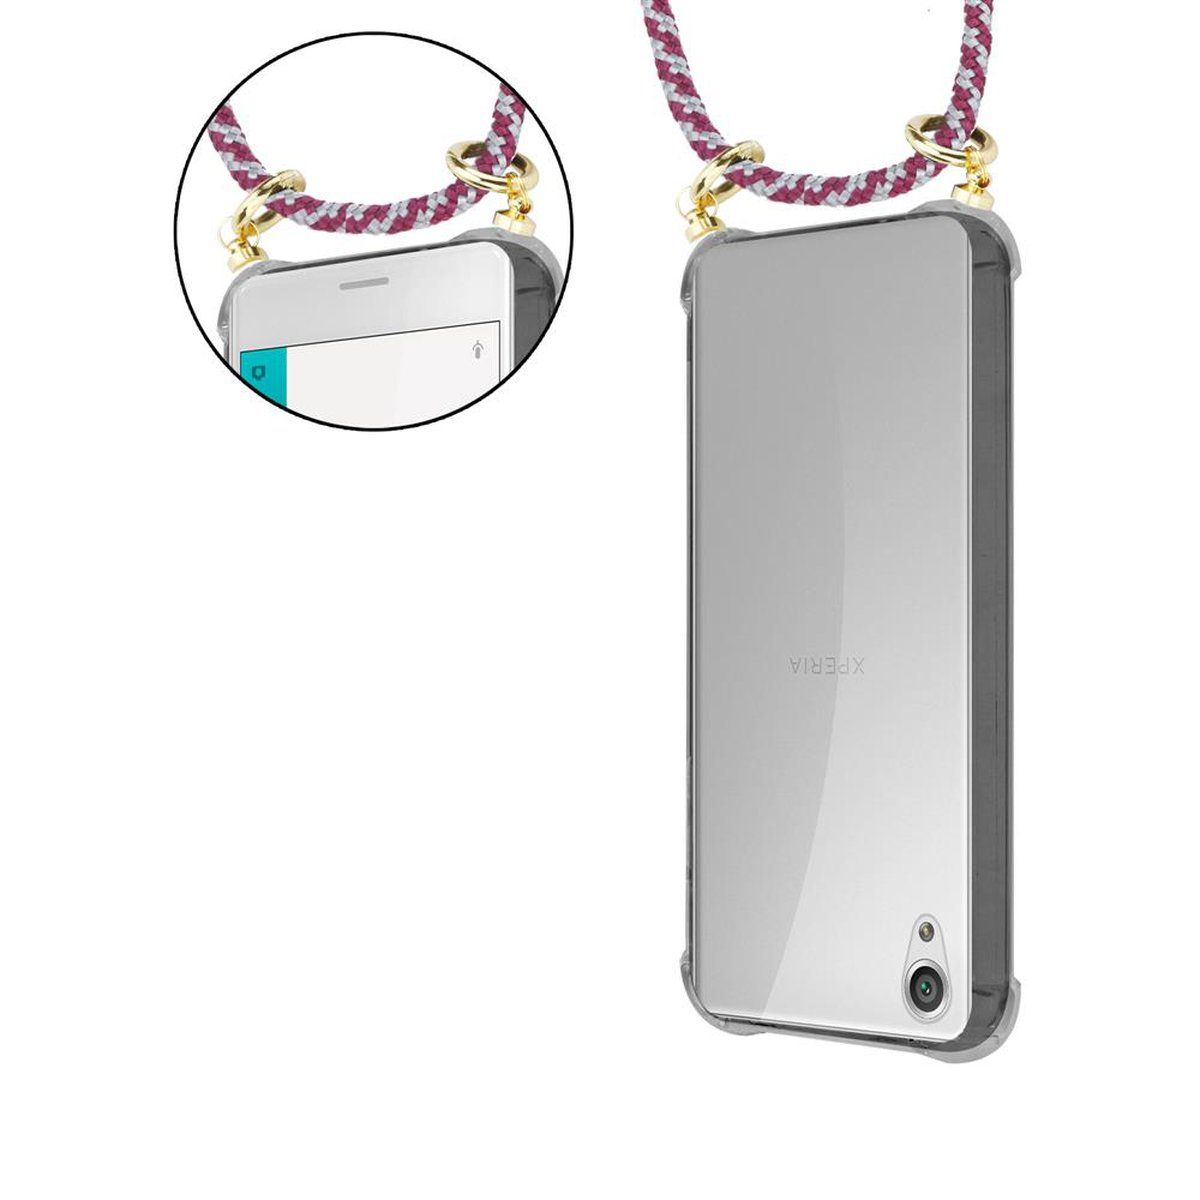 WEIß Backcover, CADORABO X, Hülle, ROT und Kordel Band Handy Sony, abnehmbarer mit Xperia Gold Kette Ringen,